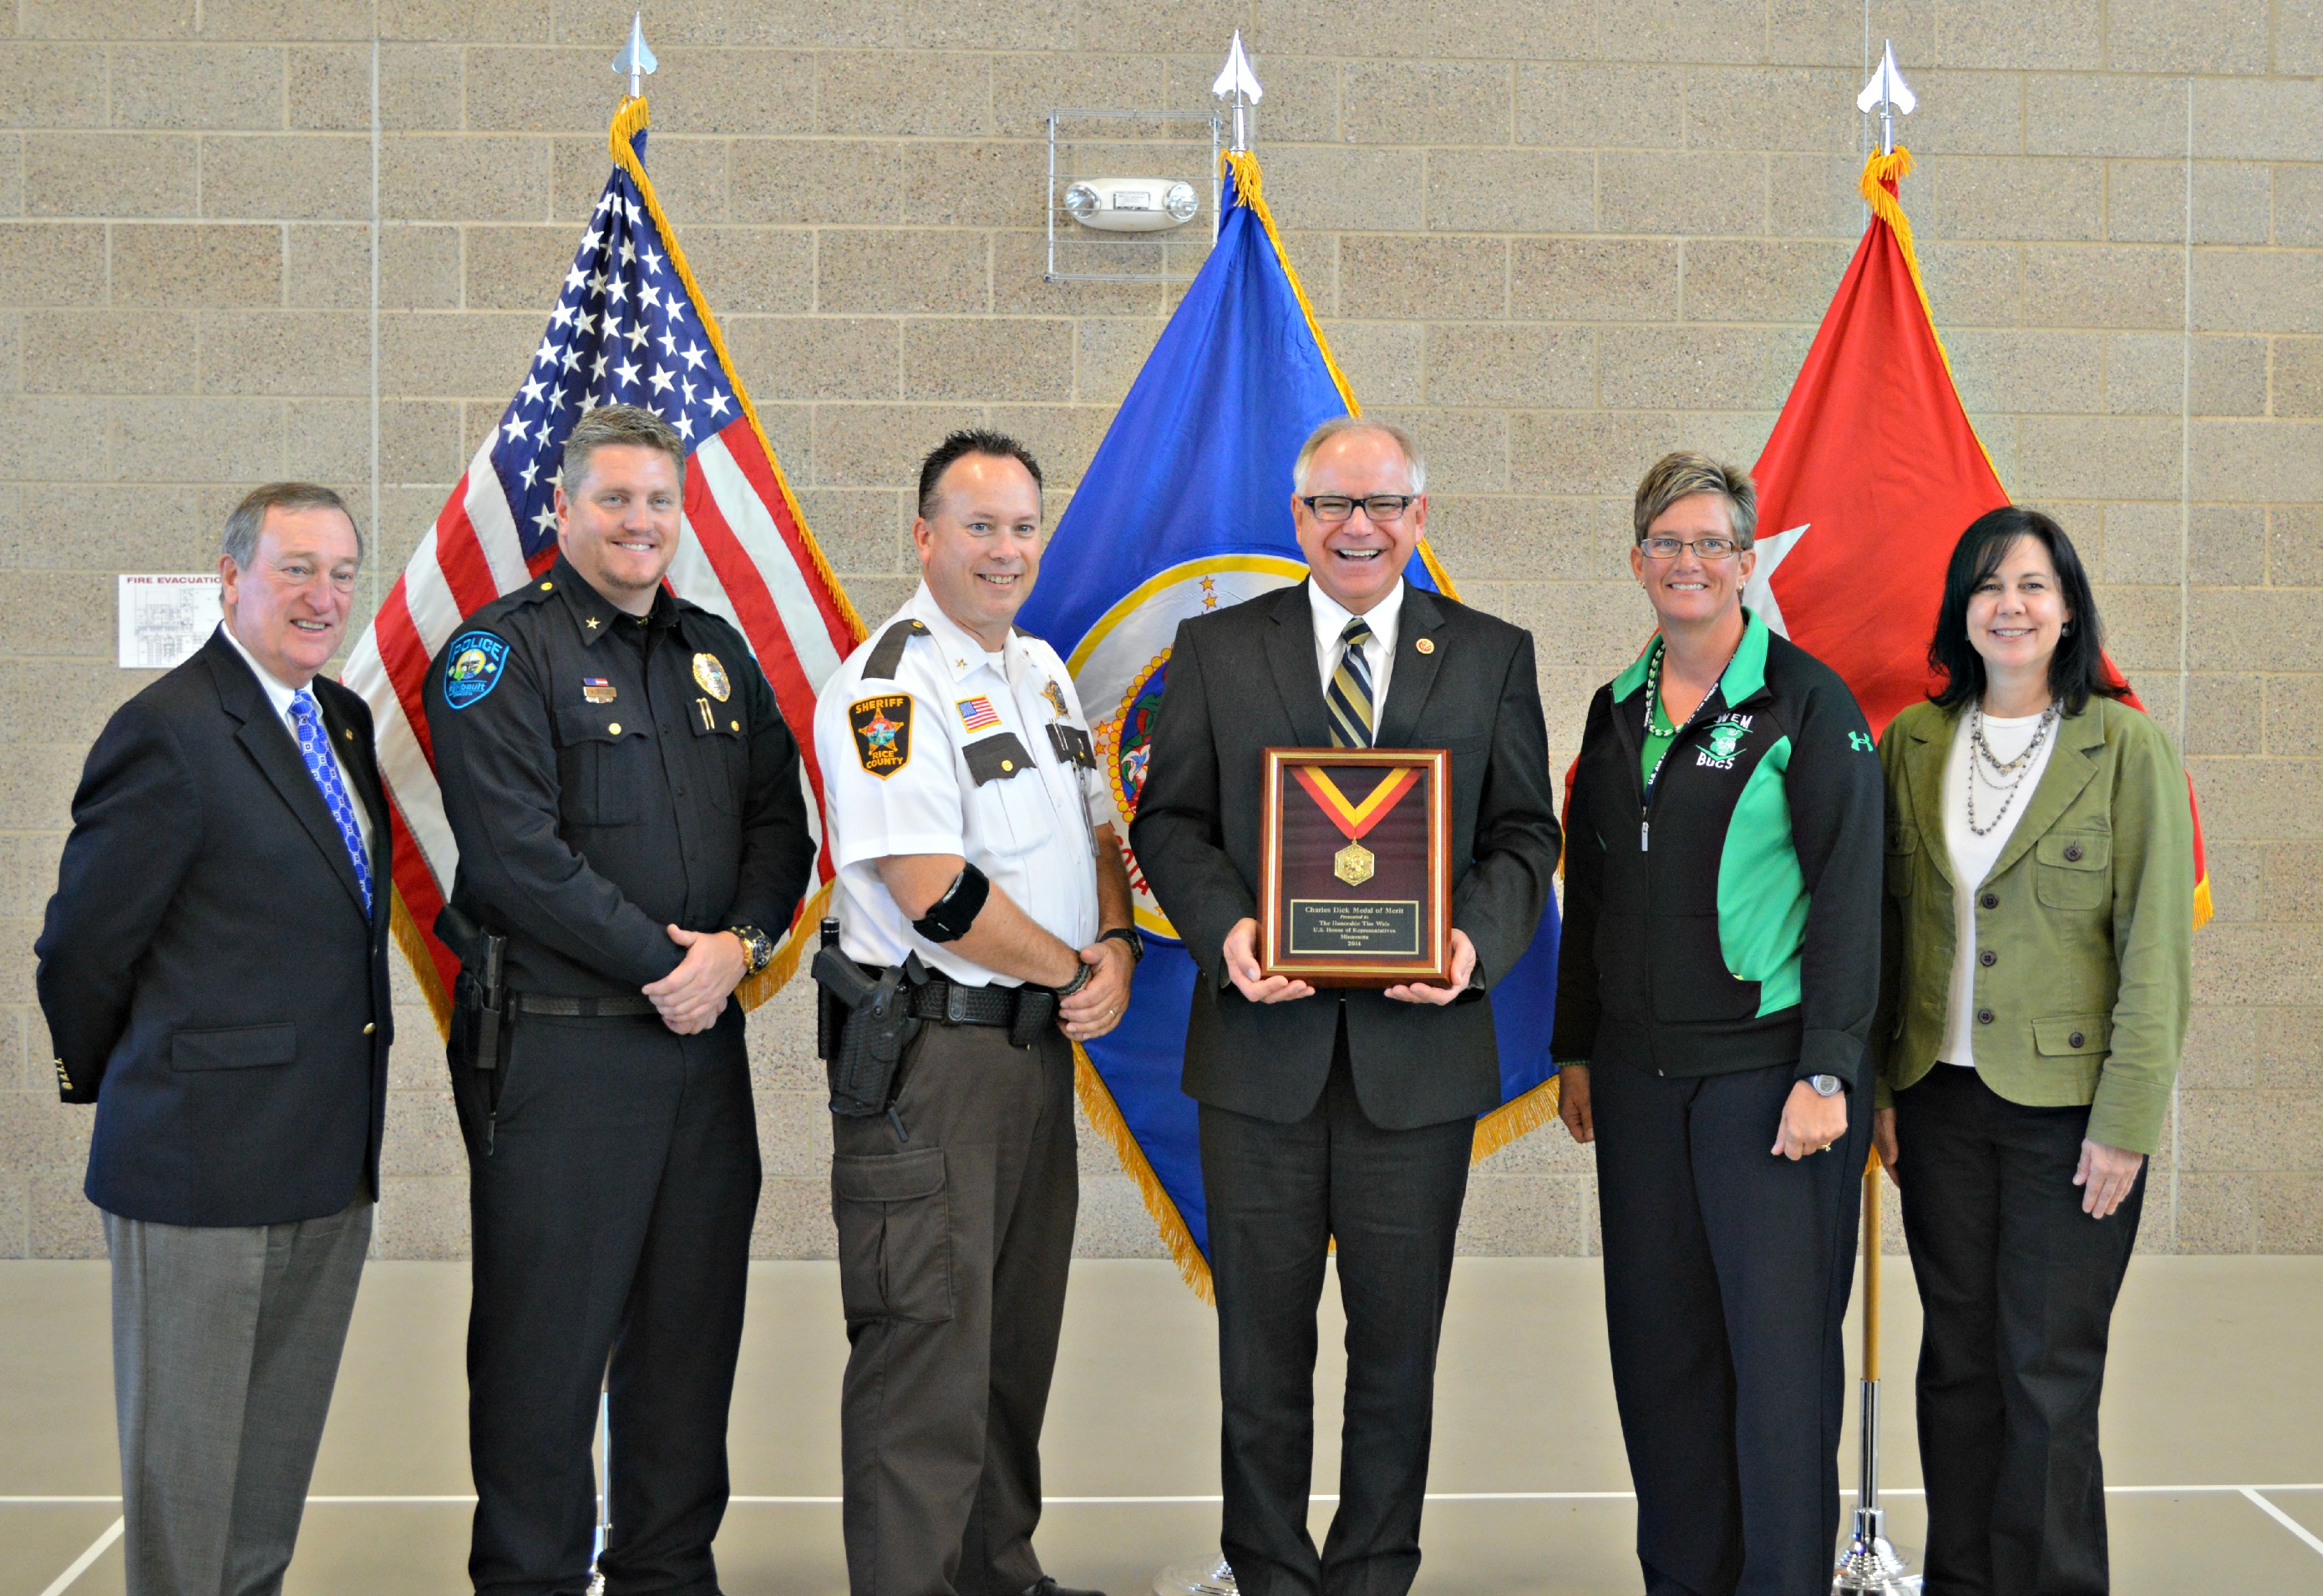 From left: Maj. Gen. (Ret.) Gus Hargett, Faribault Police Chief Andy Bohlen, Rice County Sheriff Troy Dunn, Rep. Walz, and Faribault Beyond the Yellow Ribbon representatives Tracy McBroom and Lynda Schlukebier